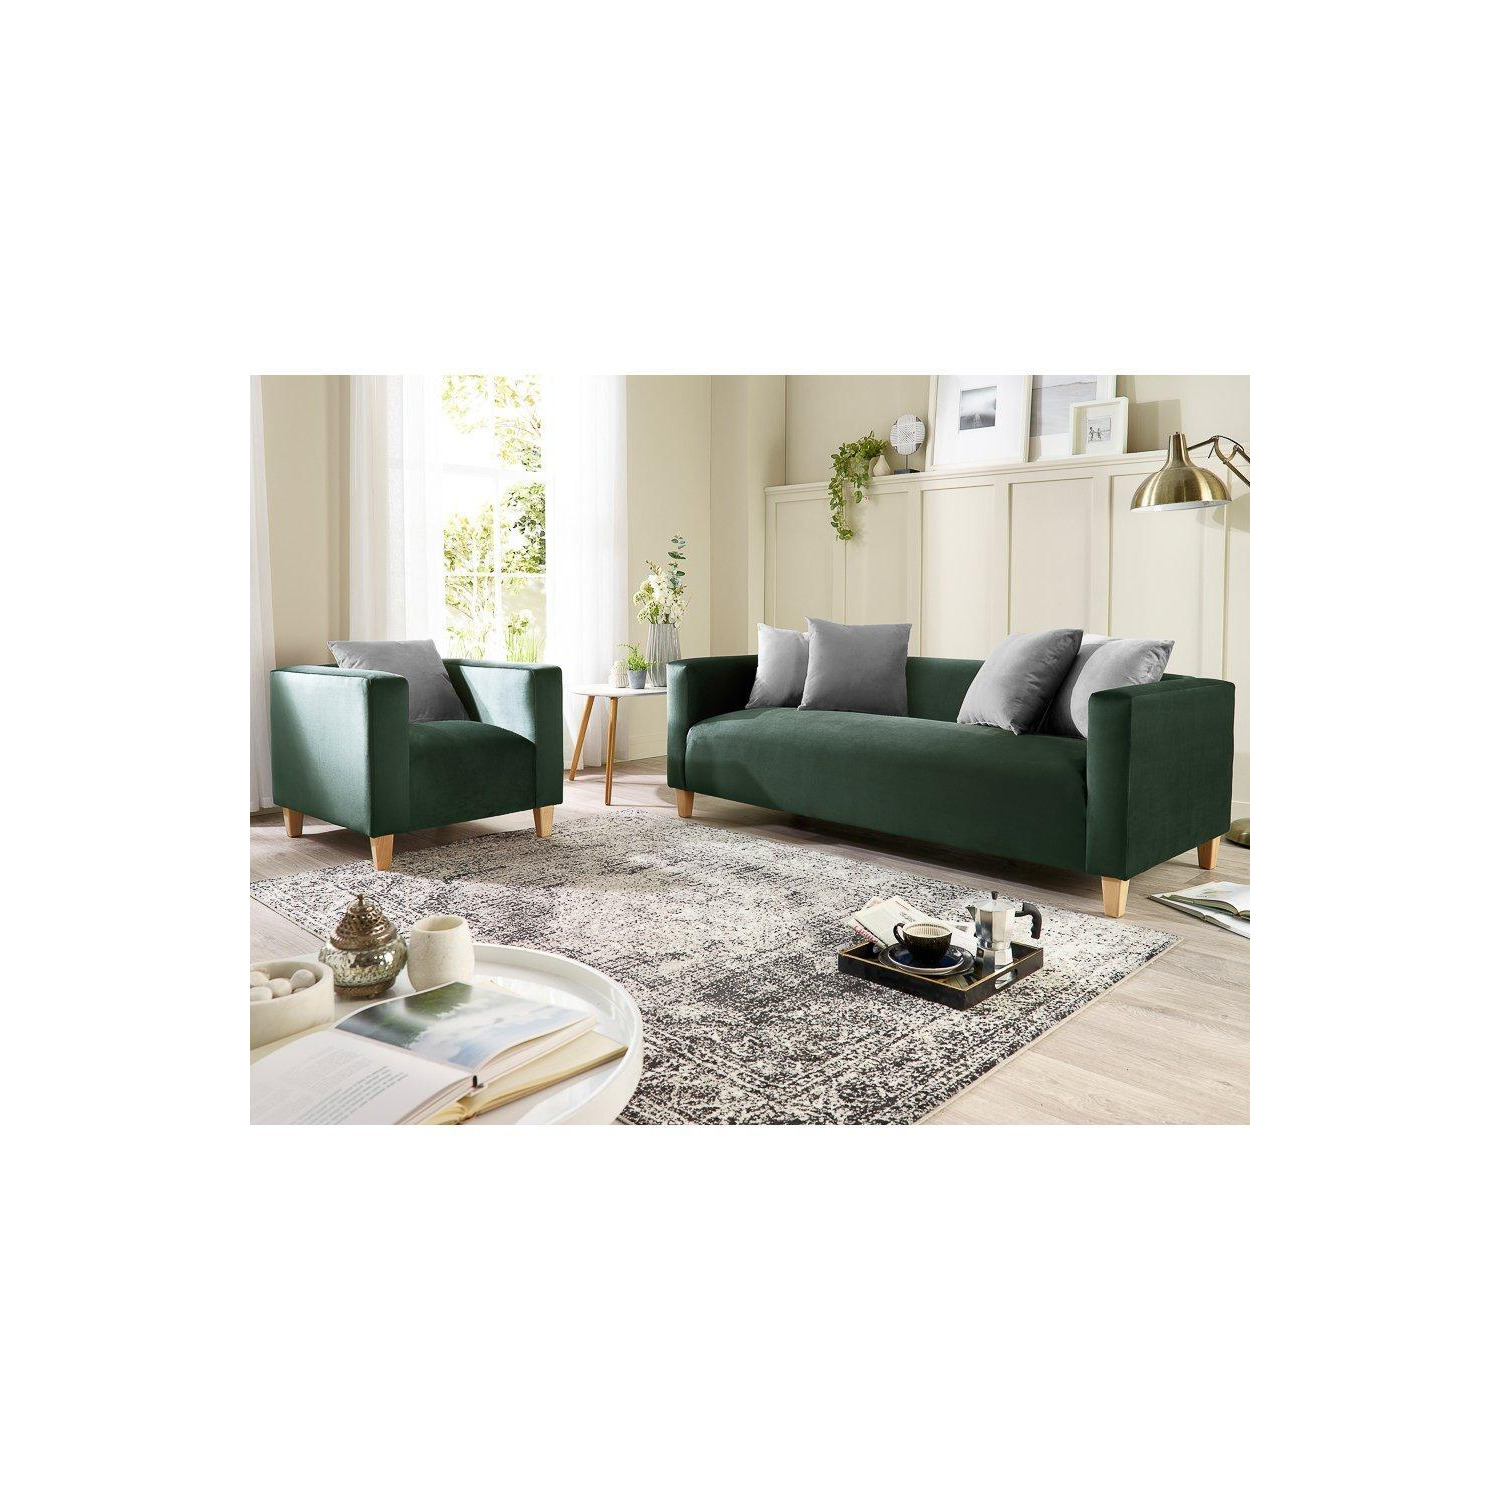 Bonnie 3 Seater & Armchair Set in Brushed Velvet - image 1